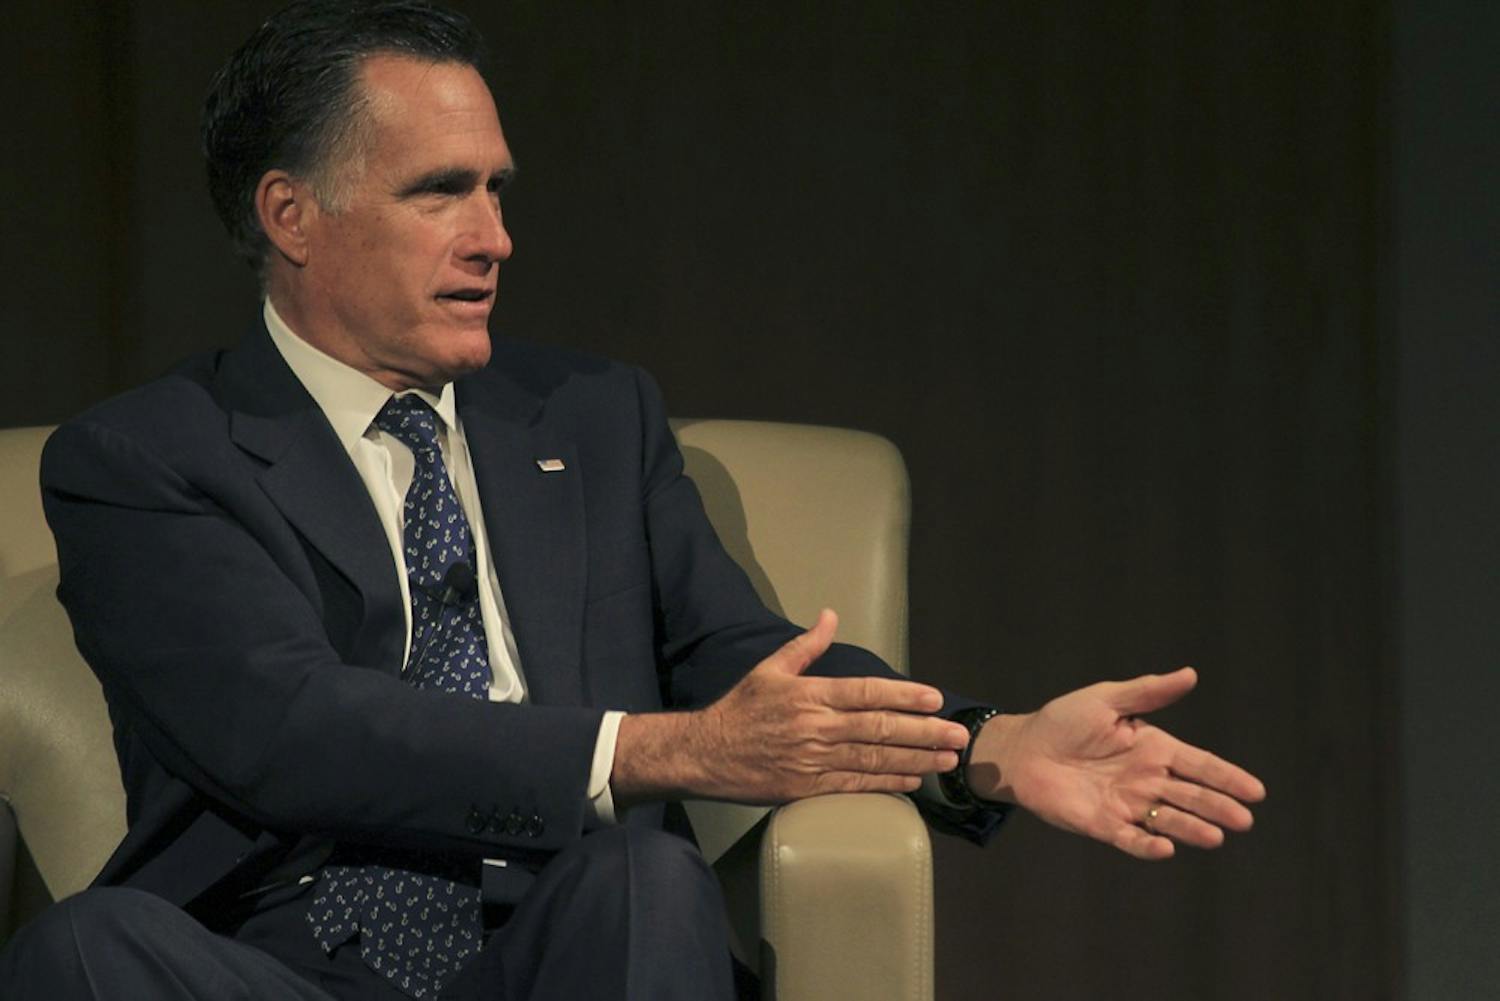 Governor Mitt Romney spook to students at Duke University Wednesday afternoon about public policy and foreign affairs.